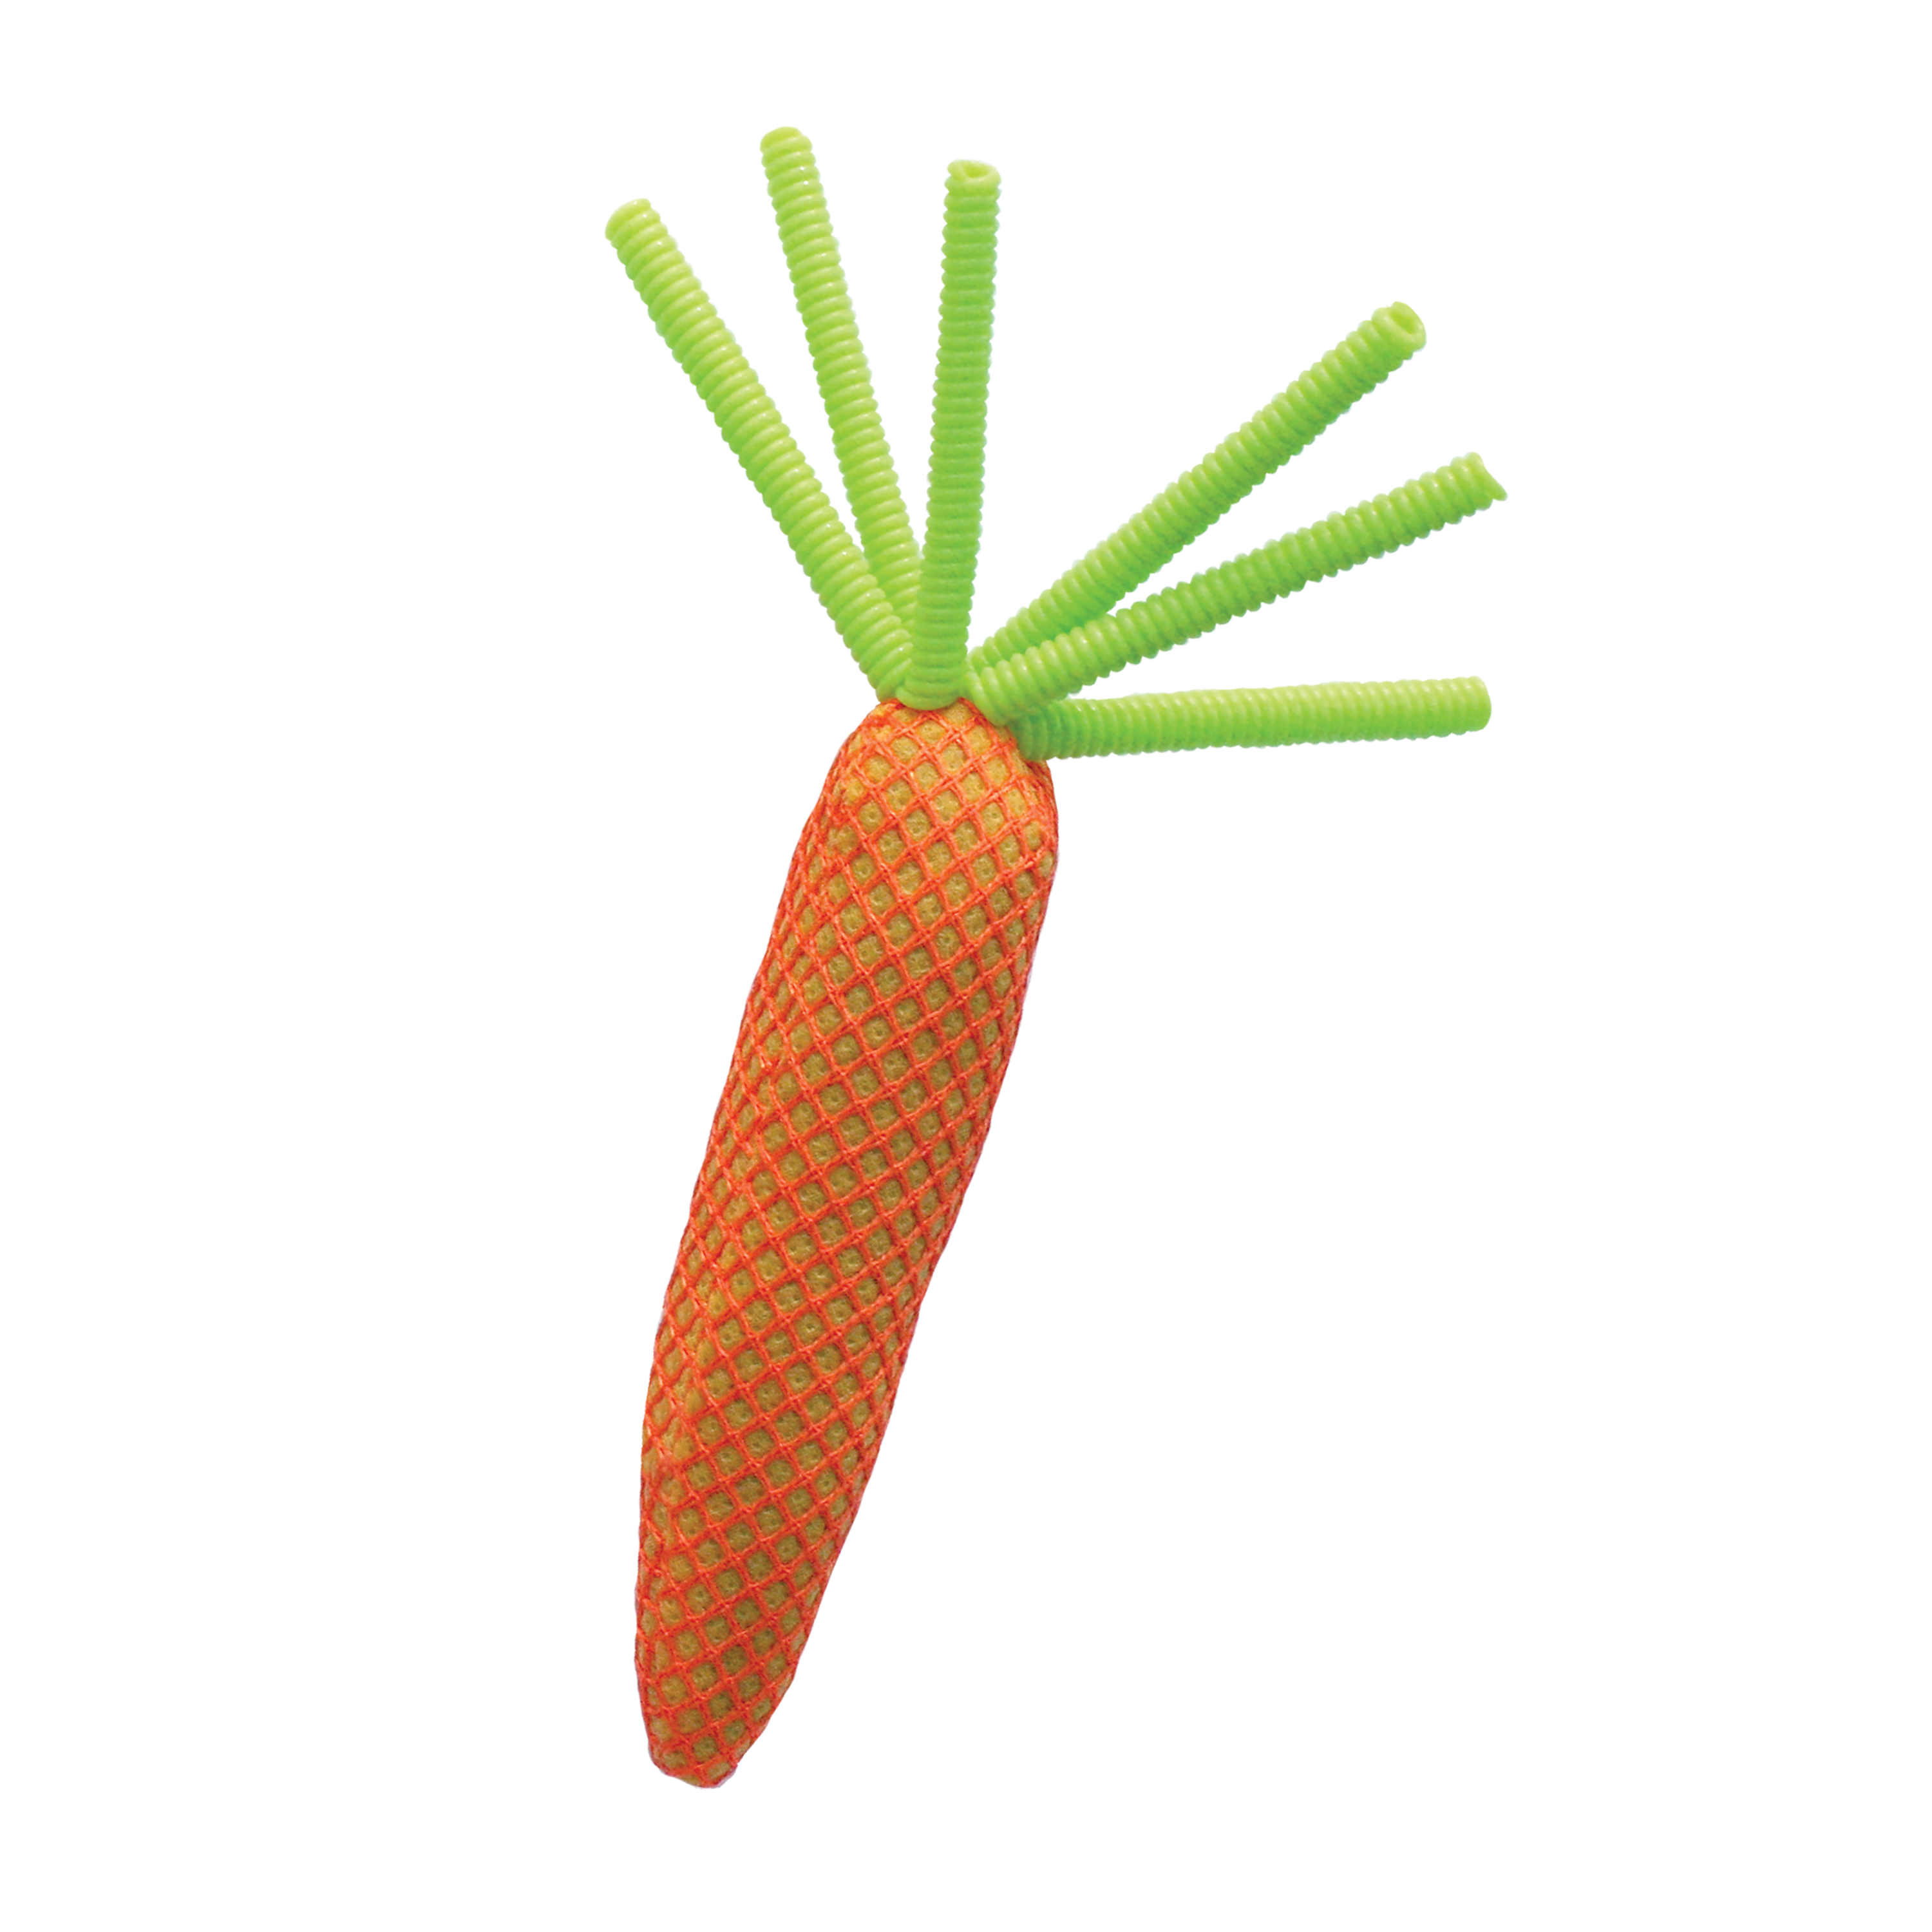 Nibble Carrots offpack product image